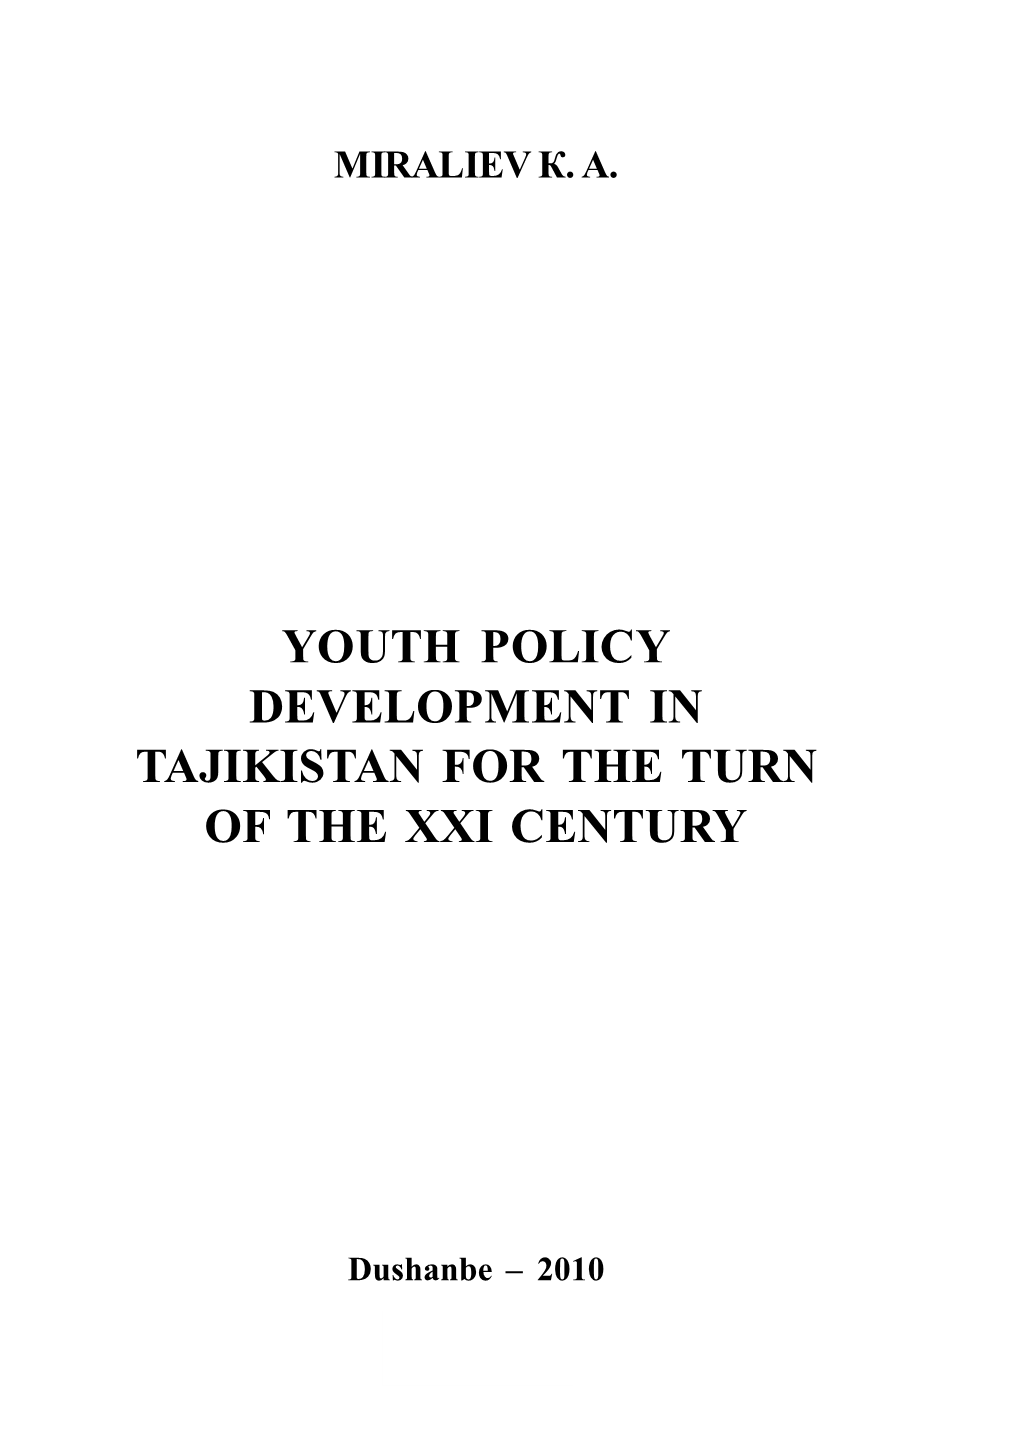 Youth Policy Development in Tajikistan for the Turn of the Xxi Century